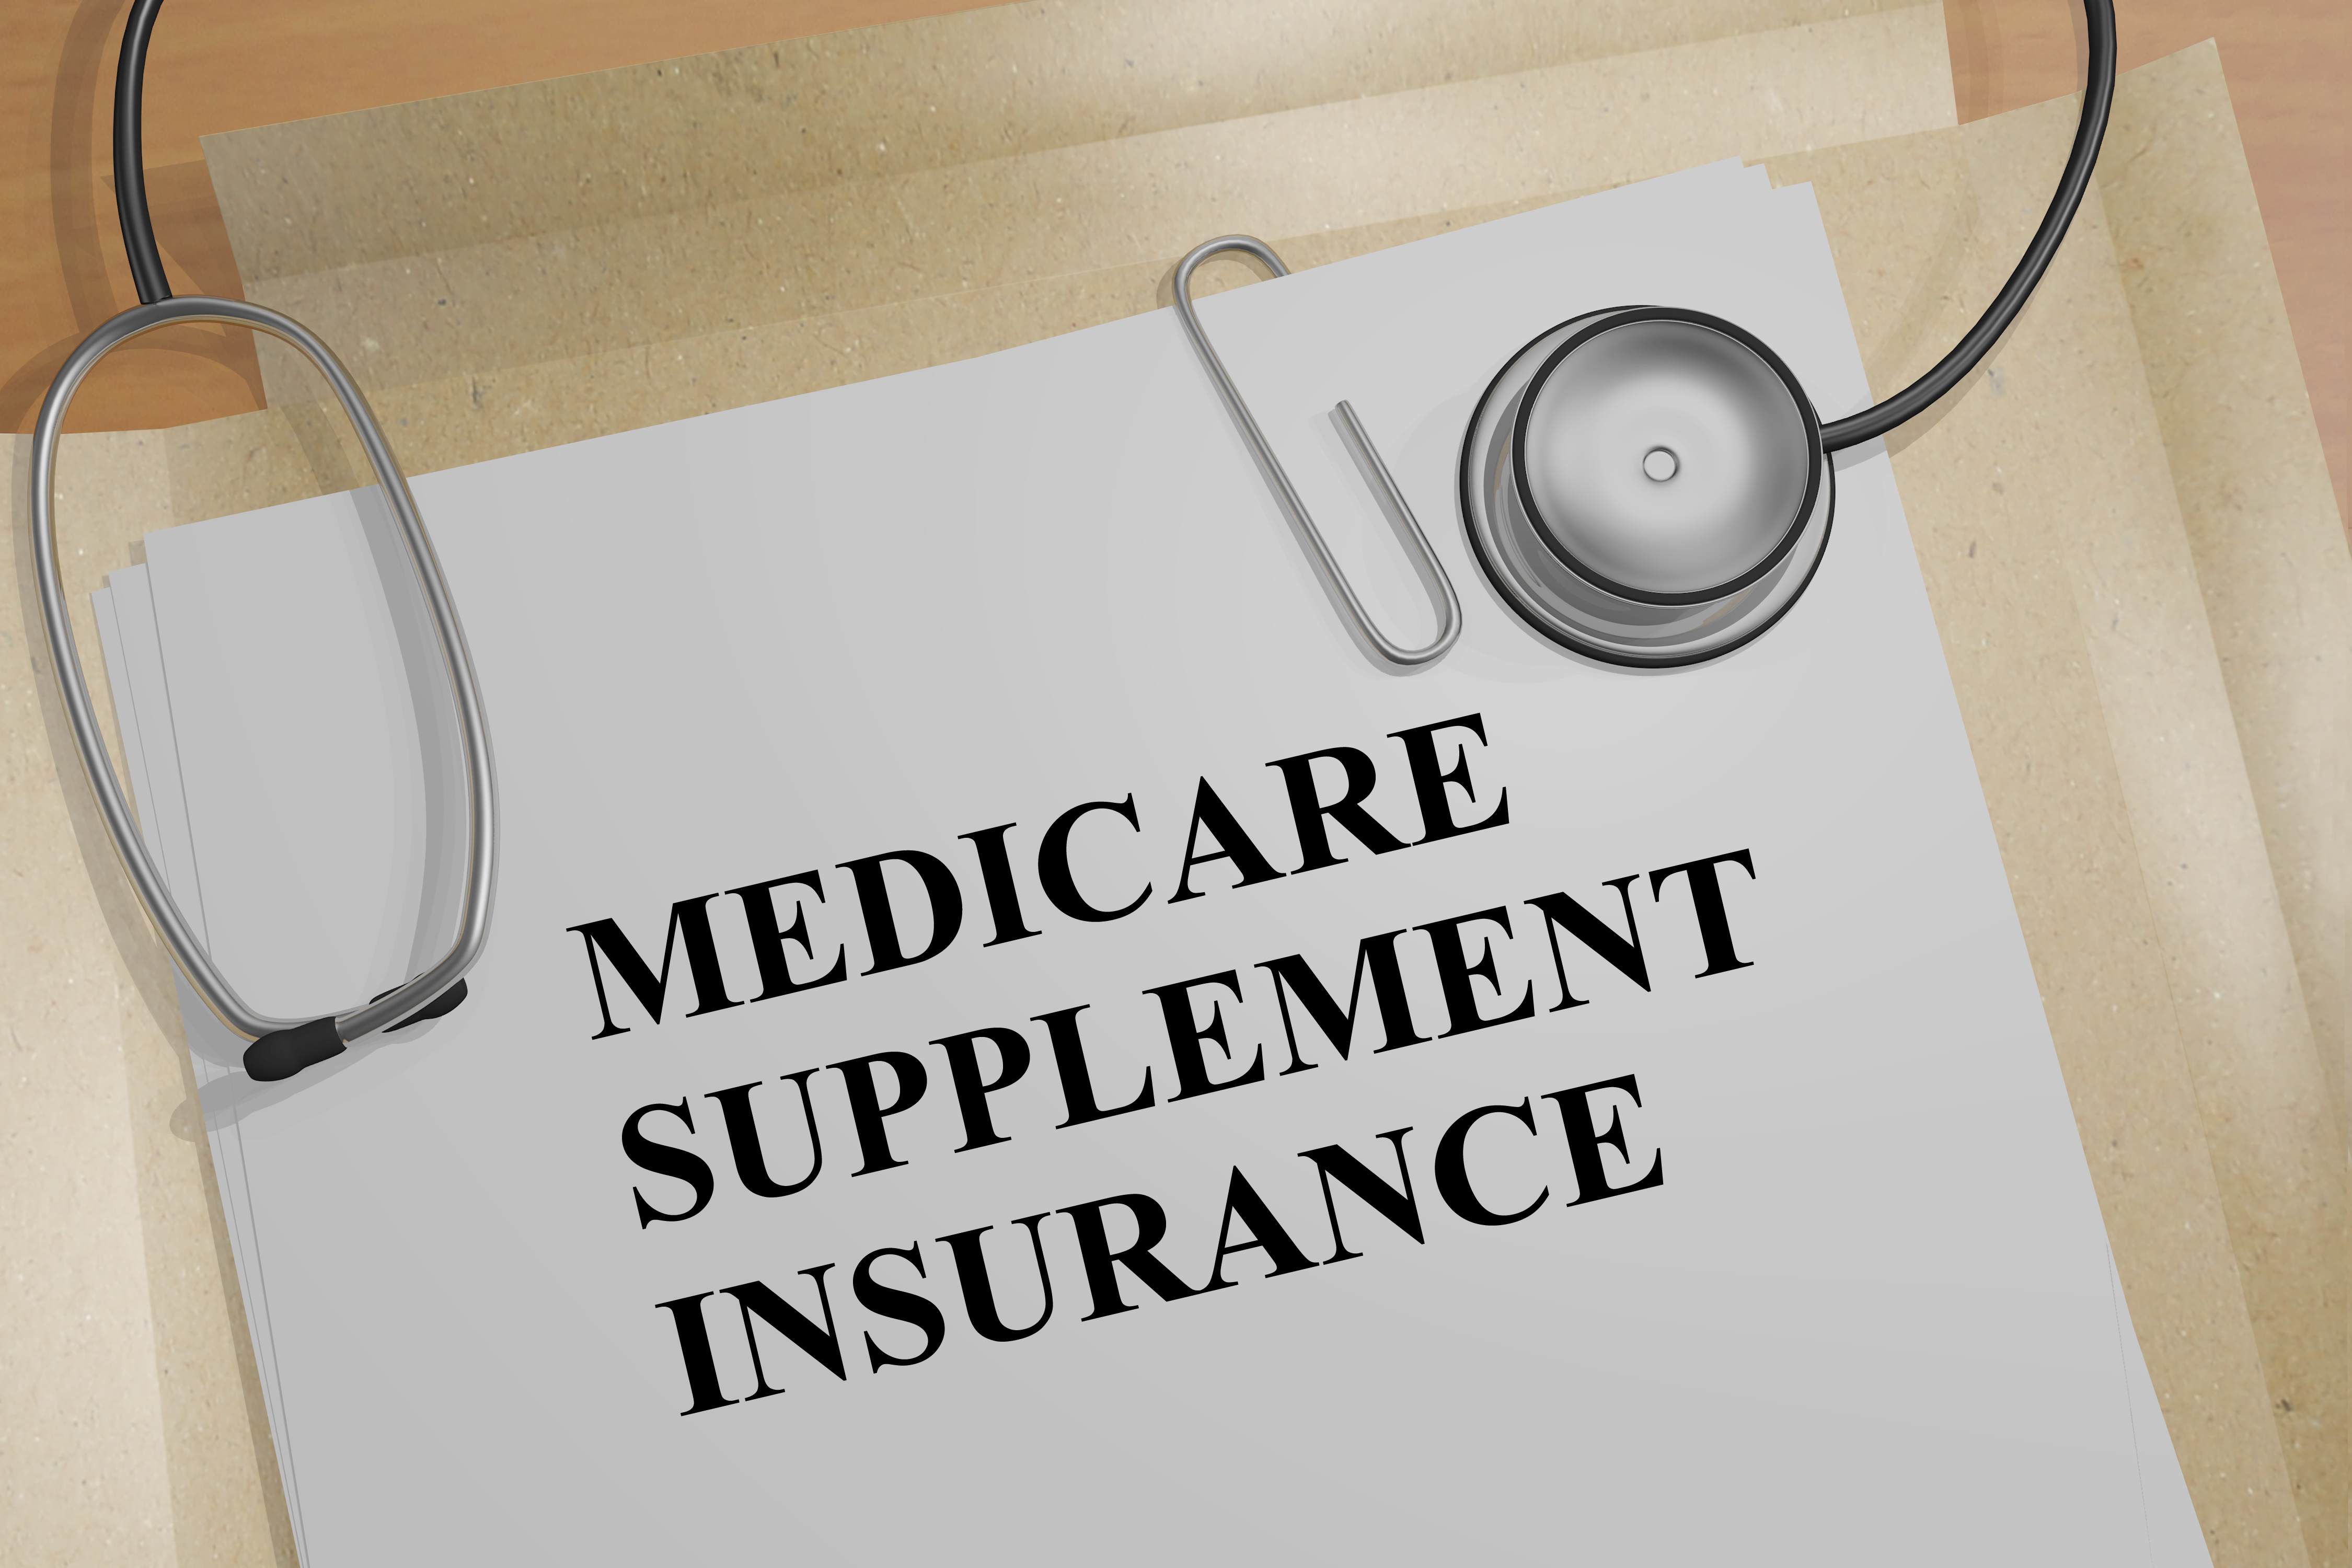 medicare-supplement-insurance-title-on-document